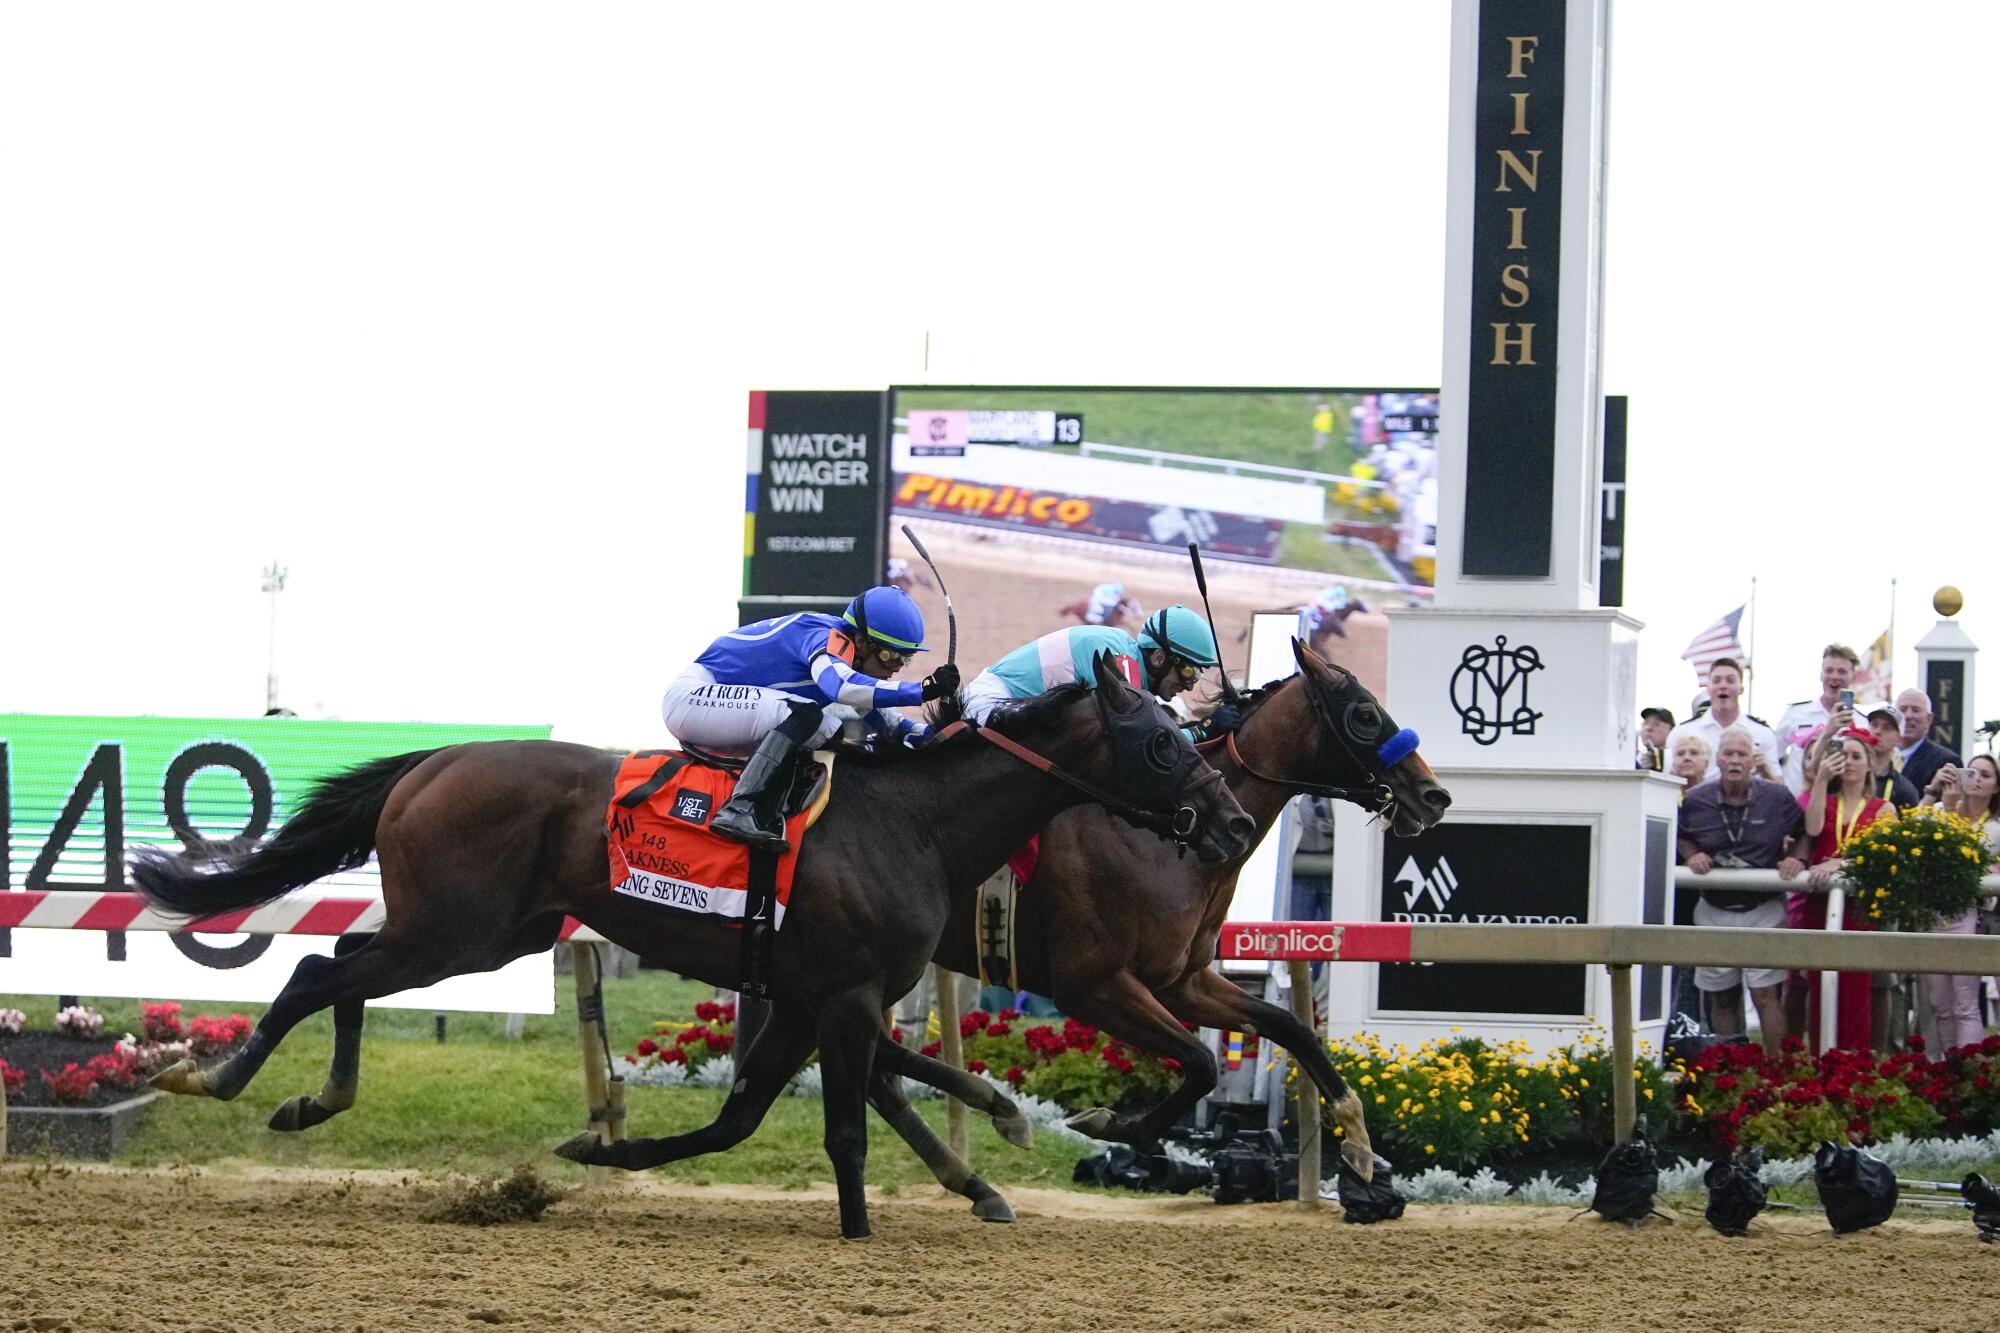 National Treasure edges out Blazing Sevens to win the148th running of the Preakness Stakes.